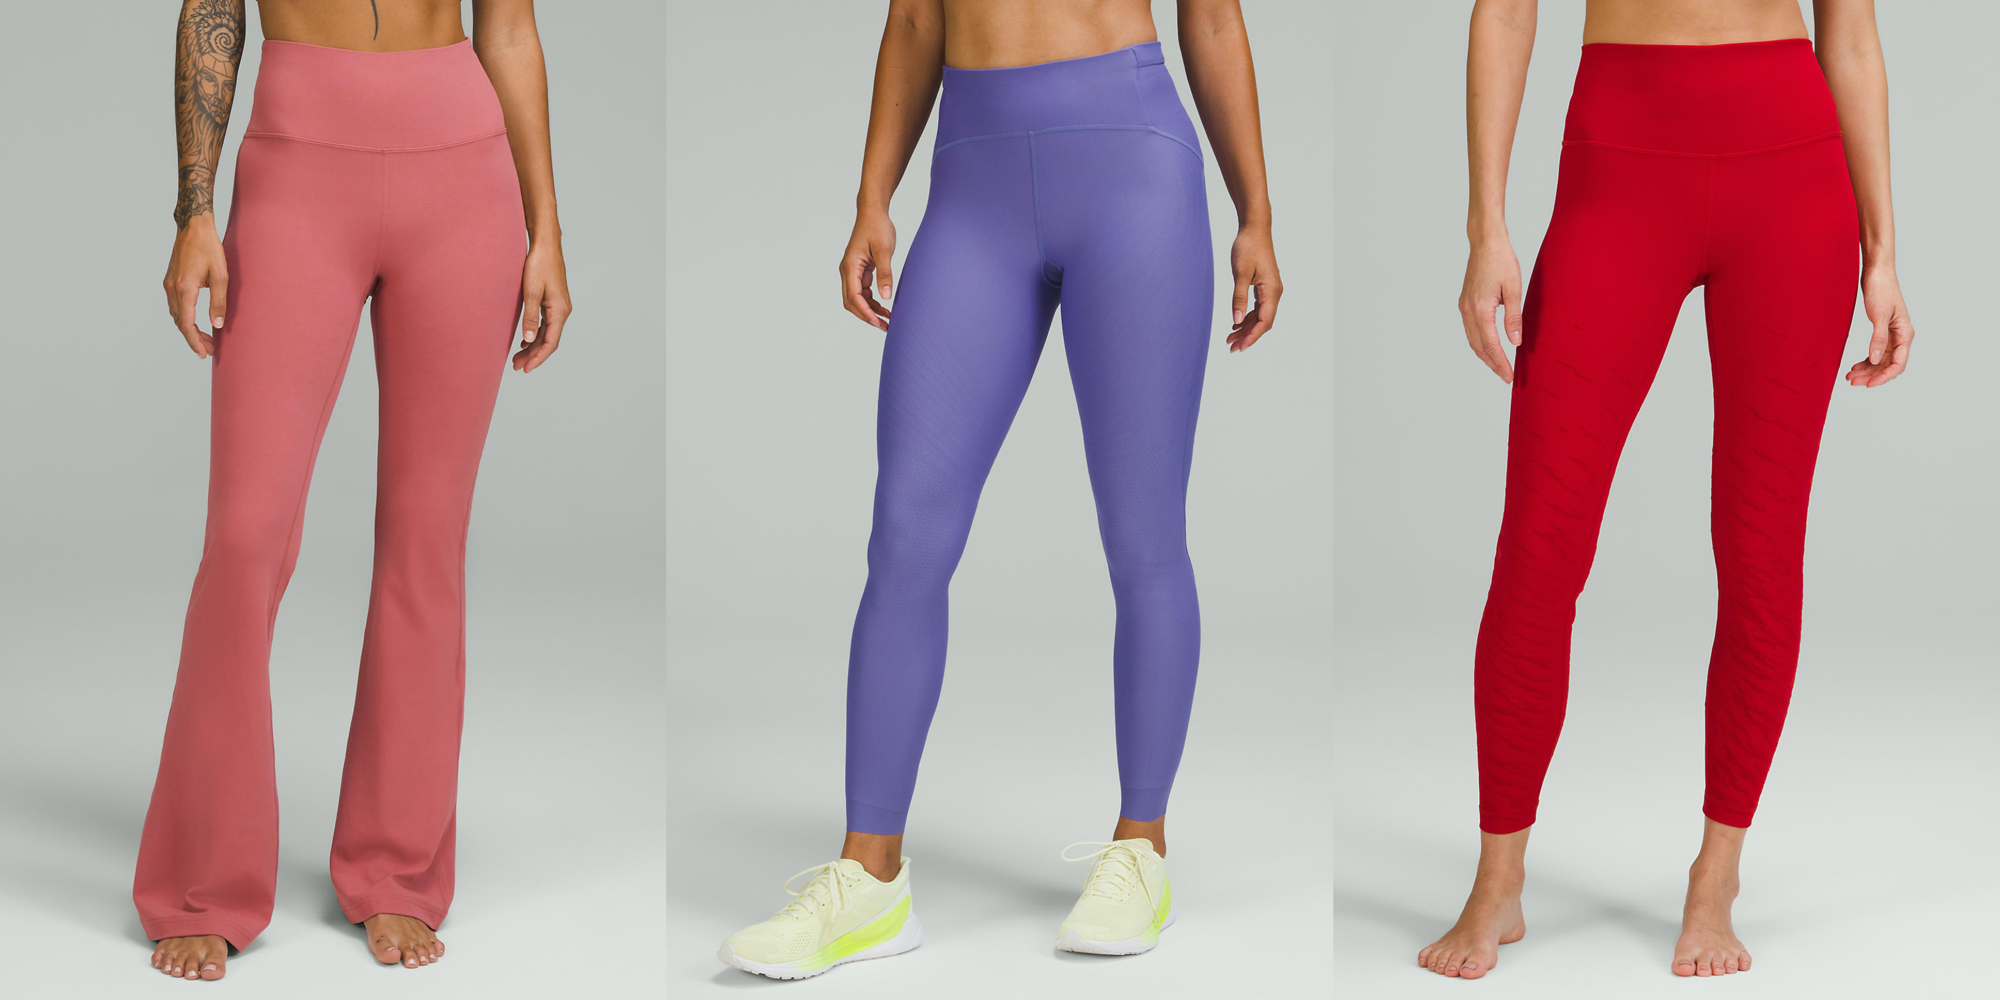 We Made Too Much Sale: Deals on Lululemon leggings and pants this